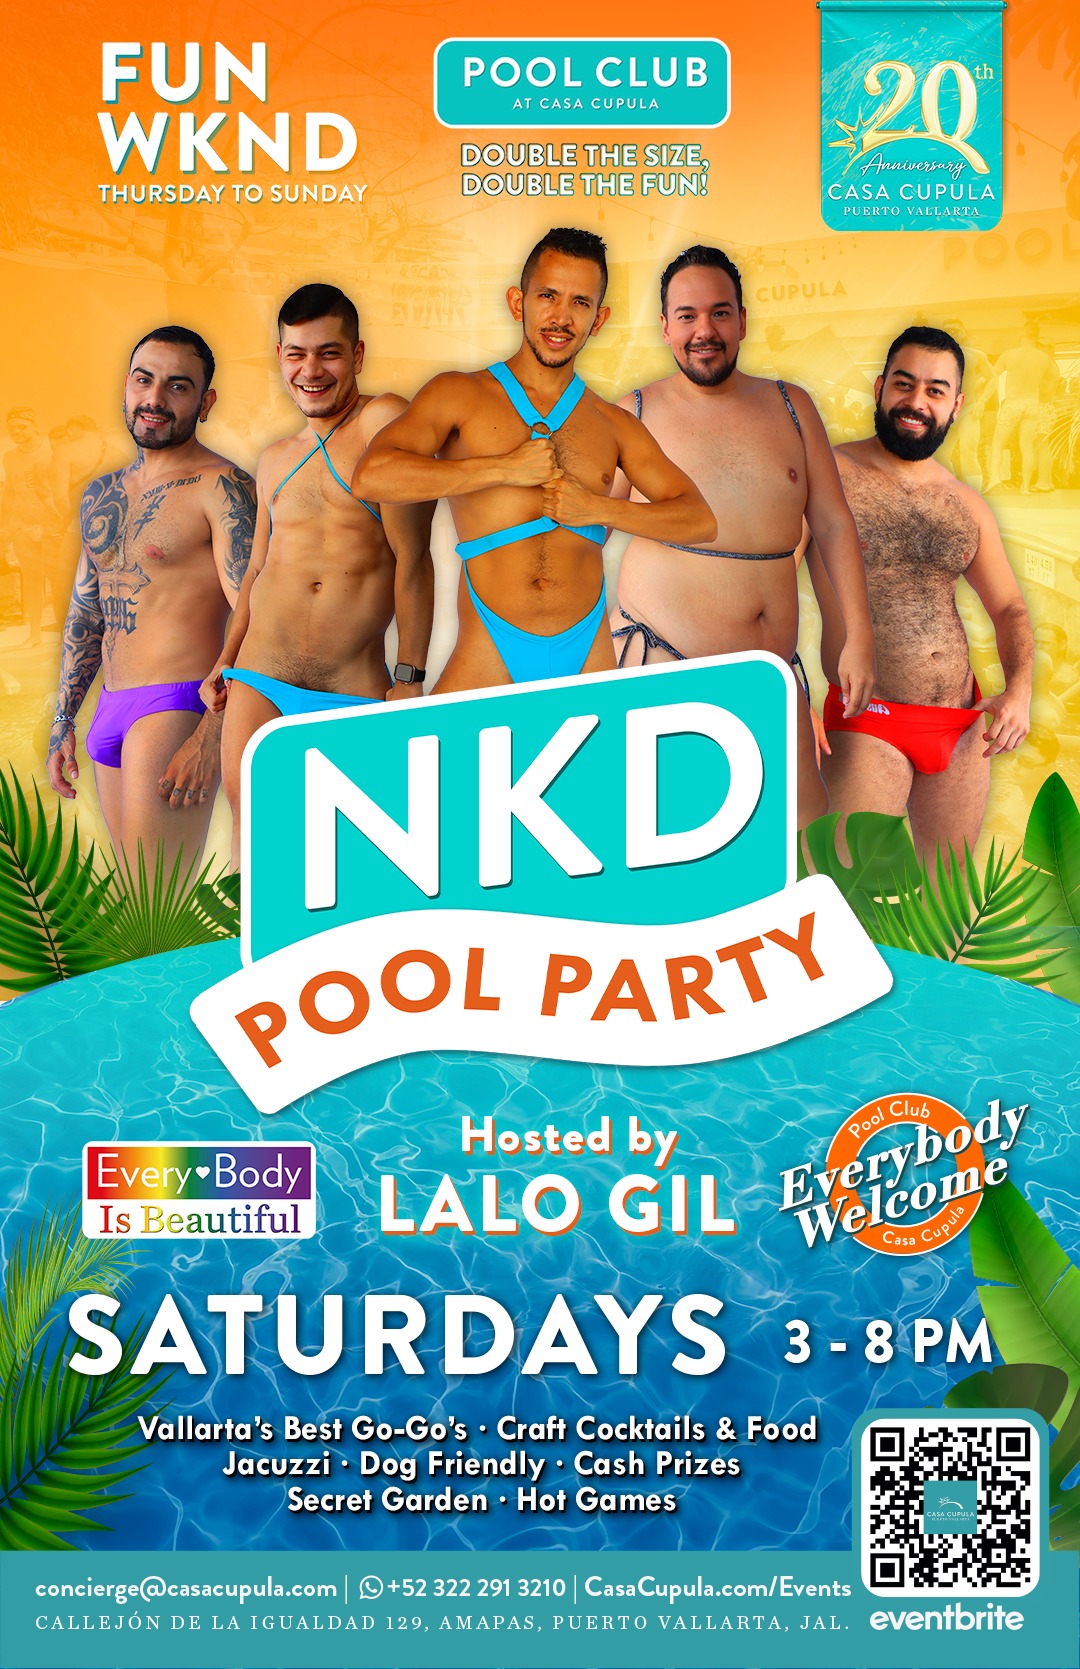 Naked Pool Party